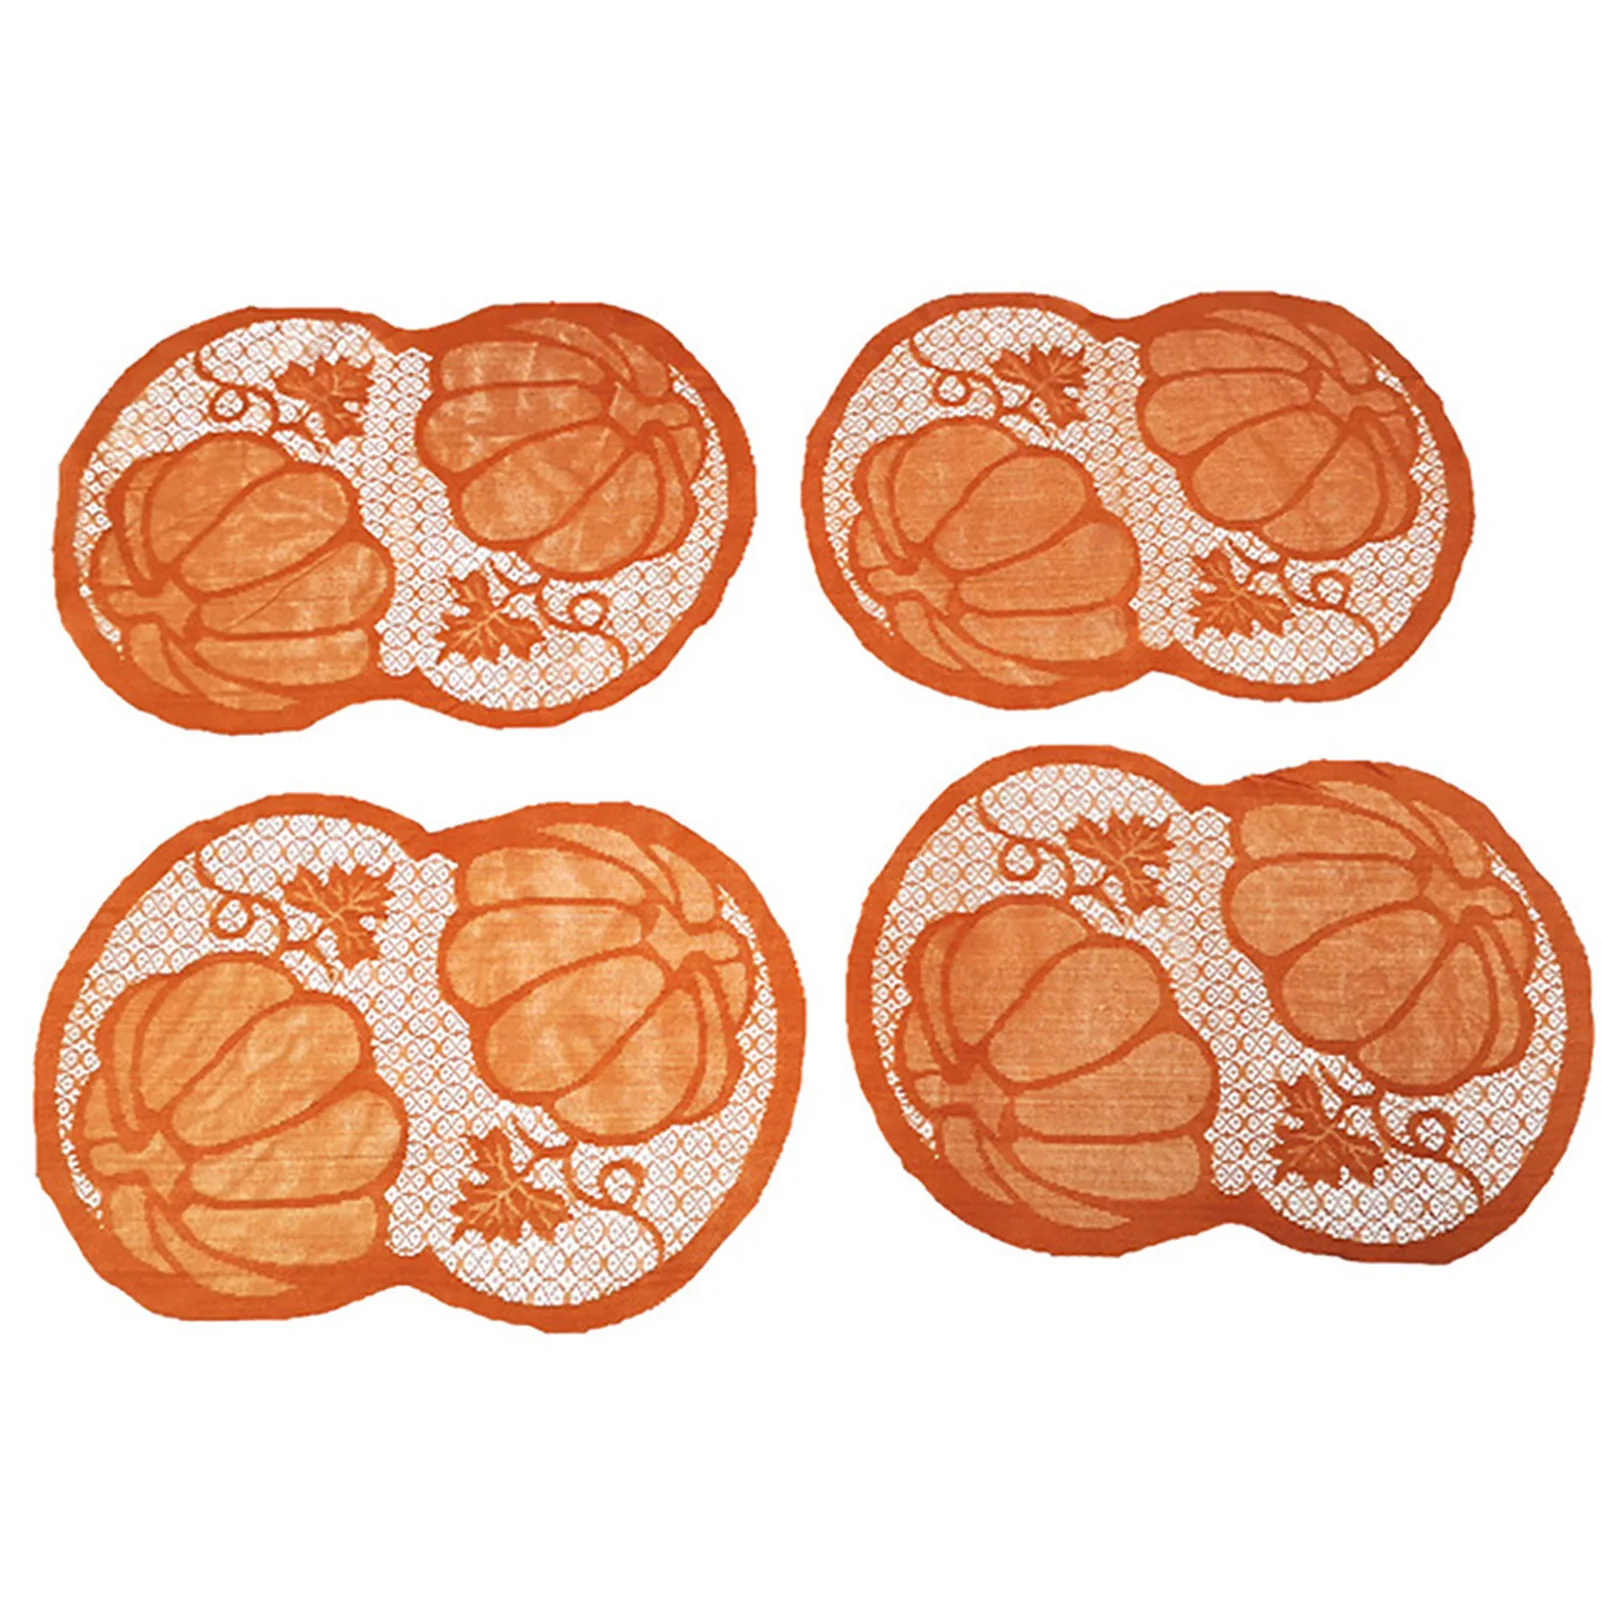 

Thanksgiving Day Table Runner and Placemats Set Orange Pumpkin Table Runners and Non-slip Placemats Autumn Harvest Home Festive